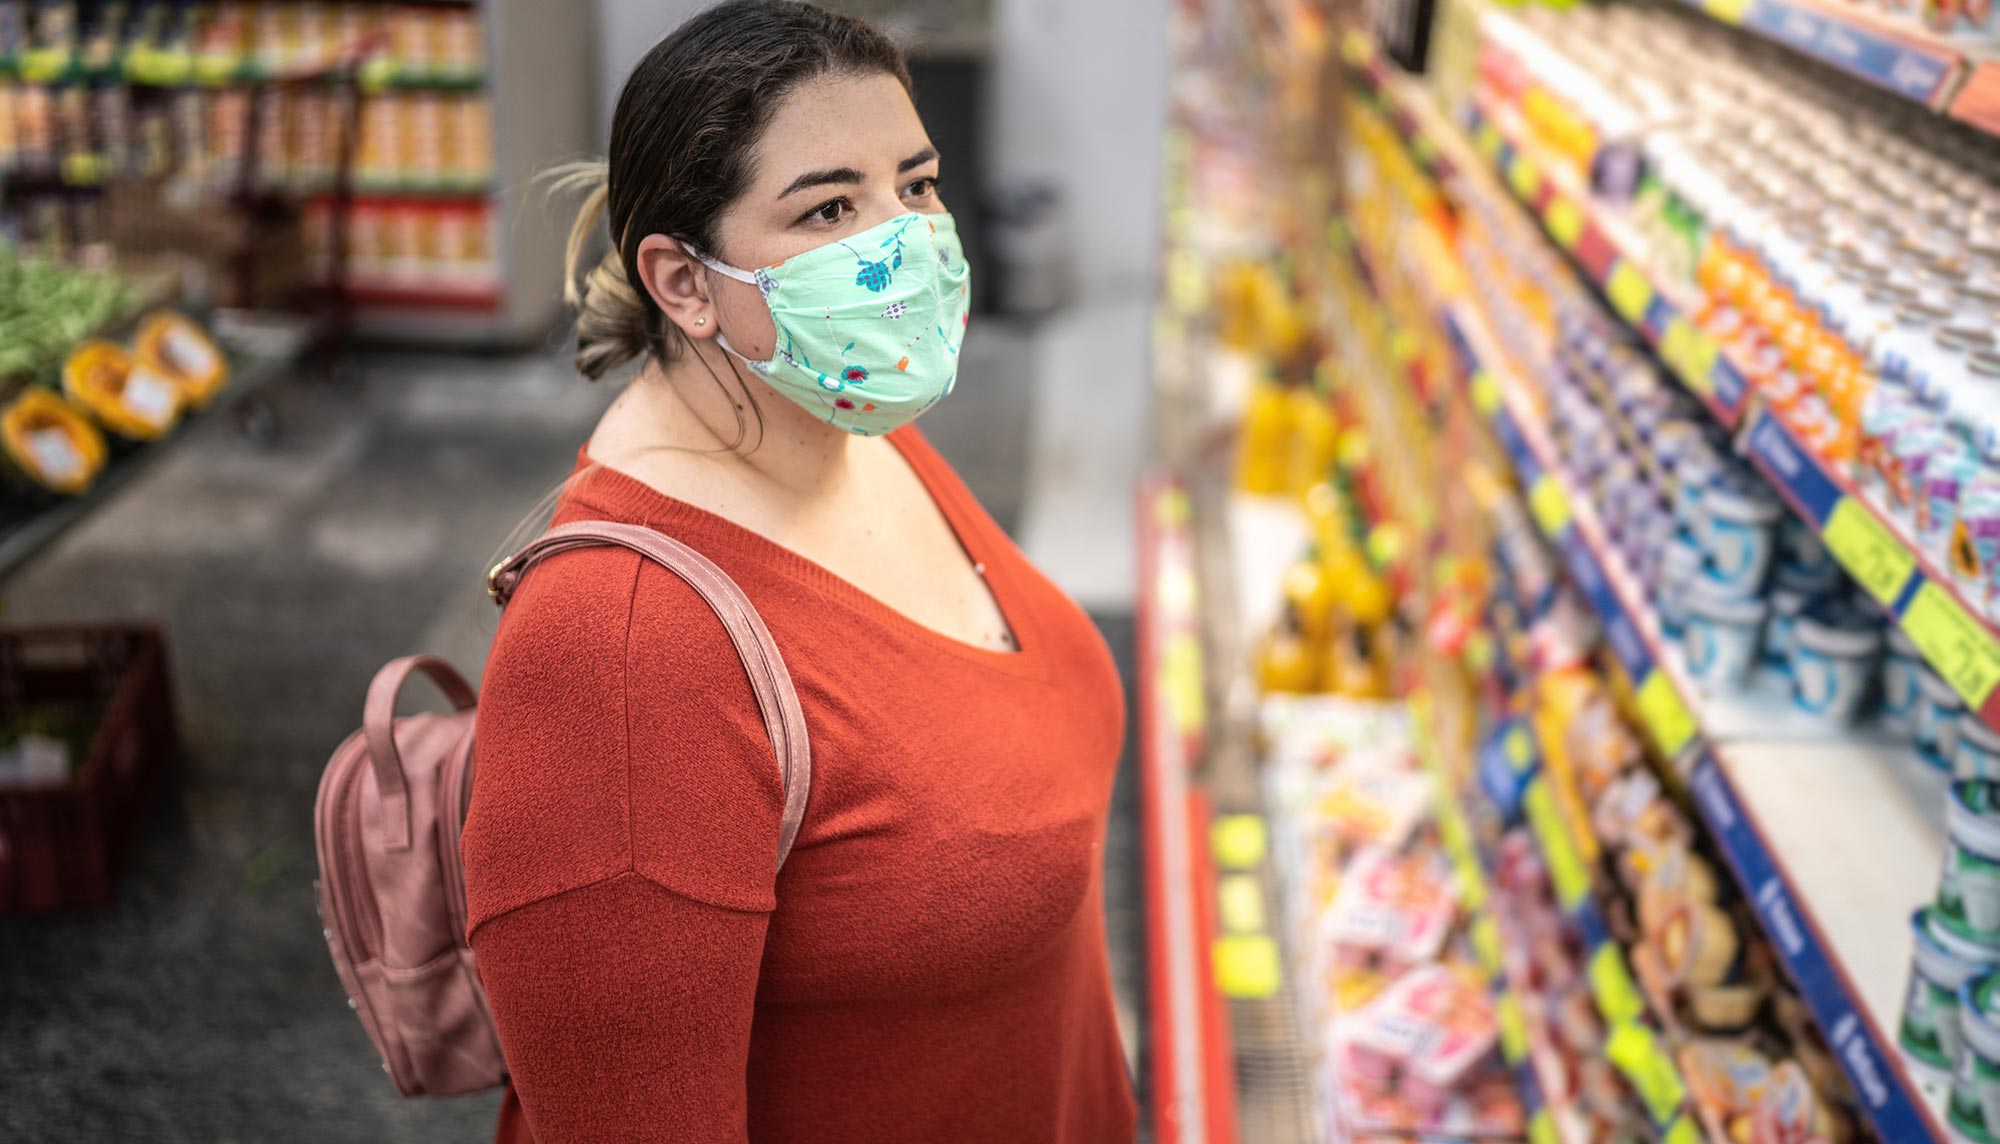 Woman grocery shopping wearing a face mask